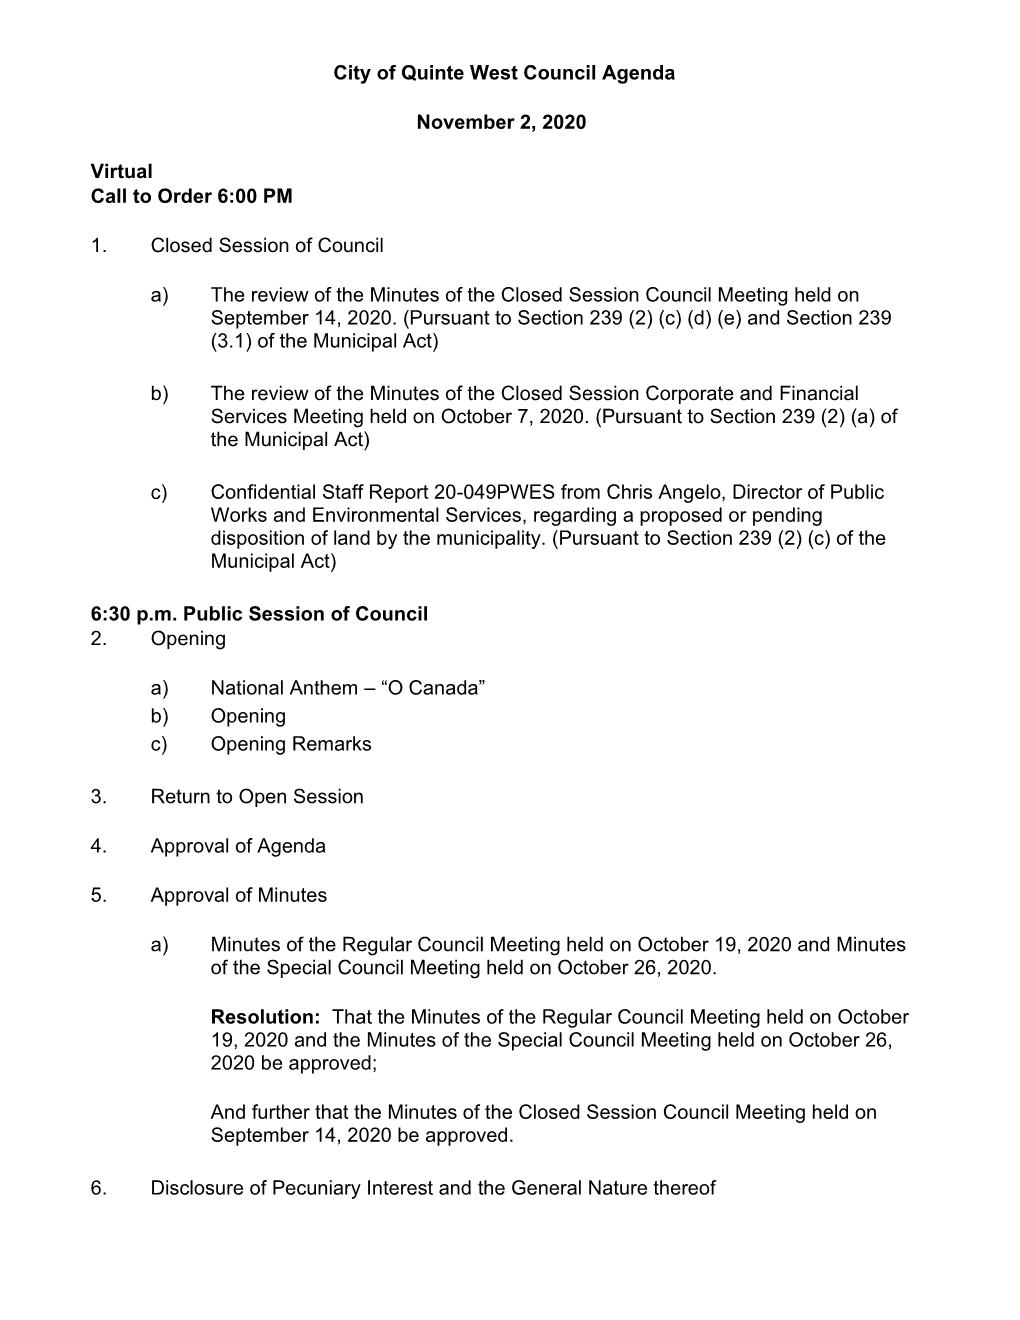 City of Quinte West Council Agenda November 2, 2020 Virtual Call to Order 6:00 PM 1. Closed Session of Council A) the Review Of